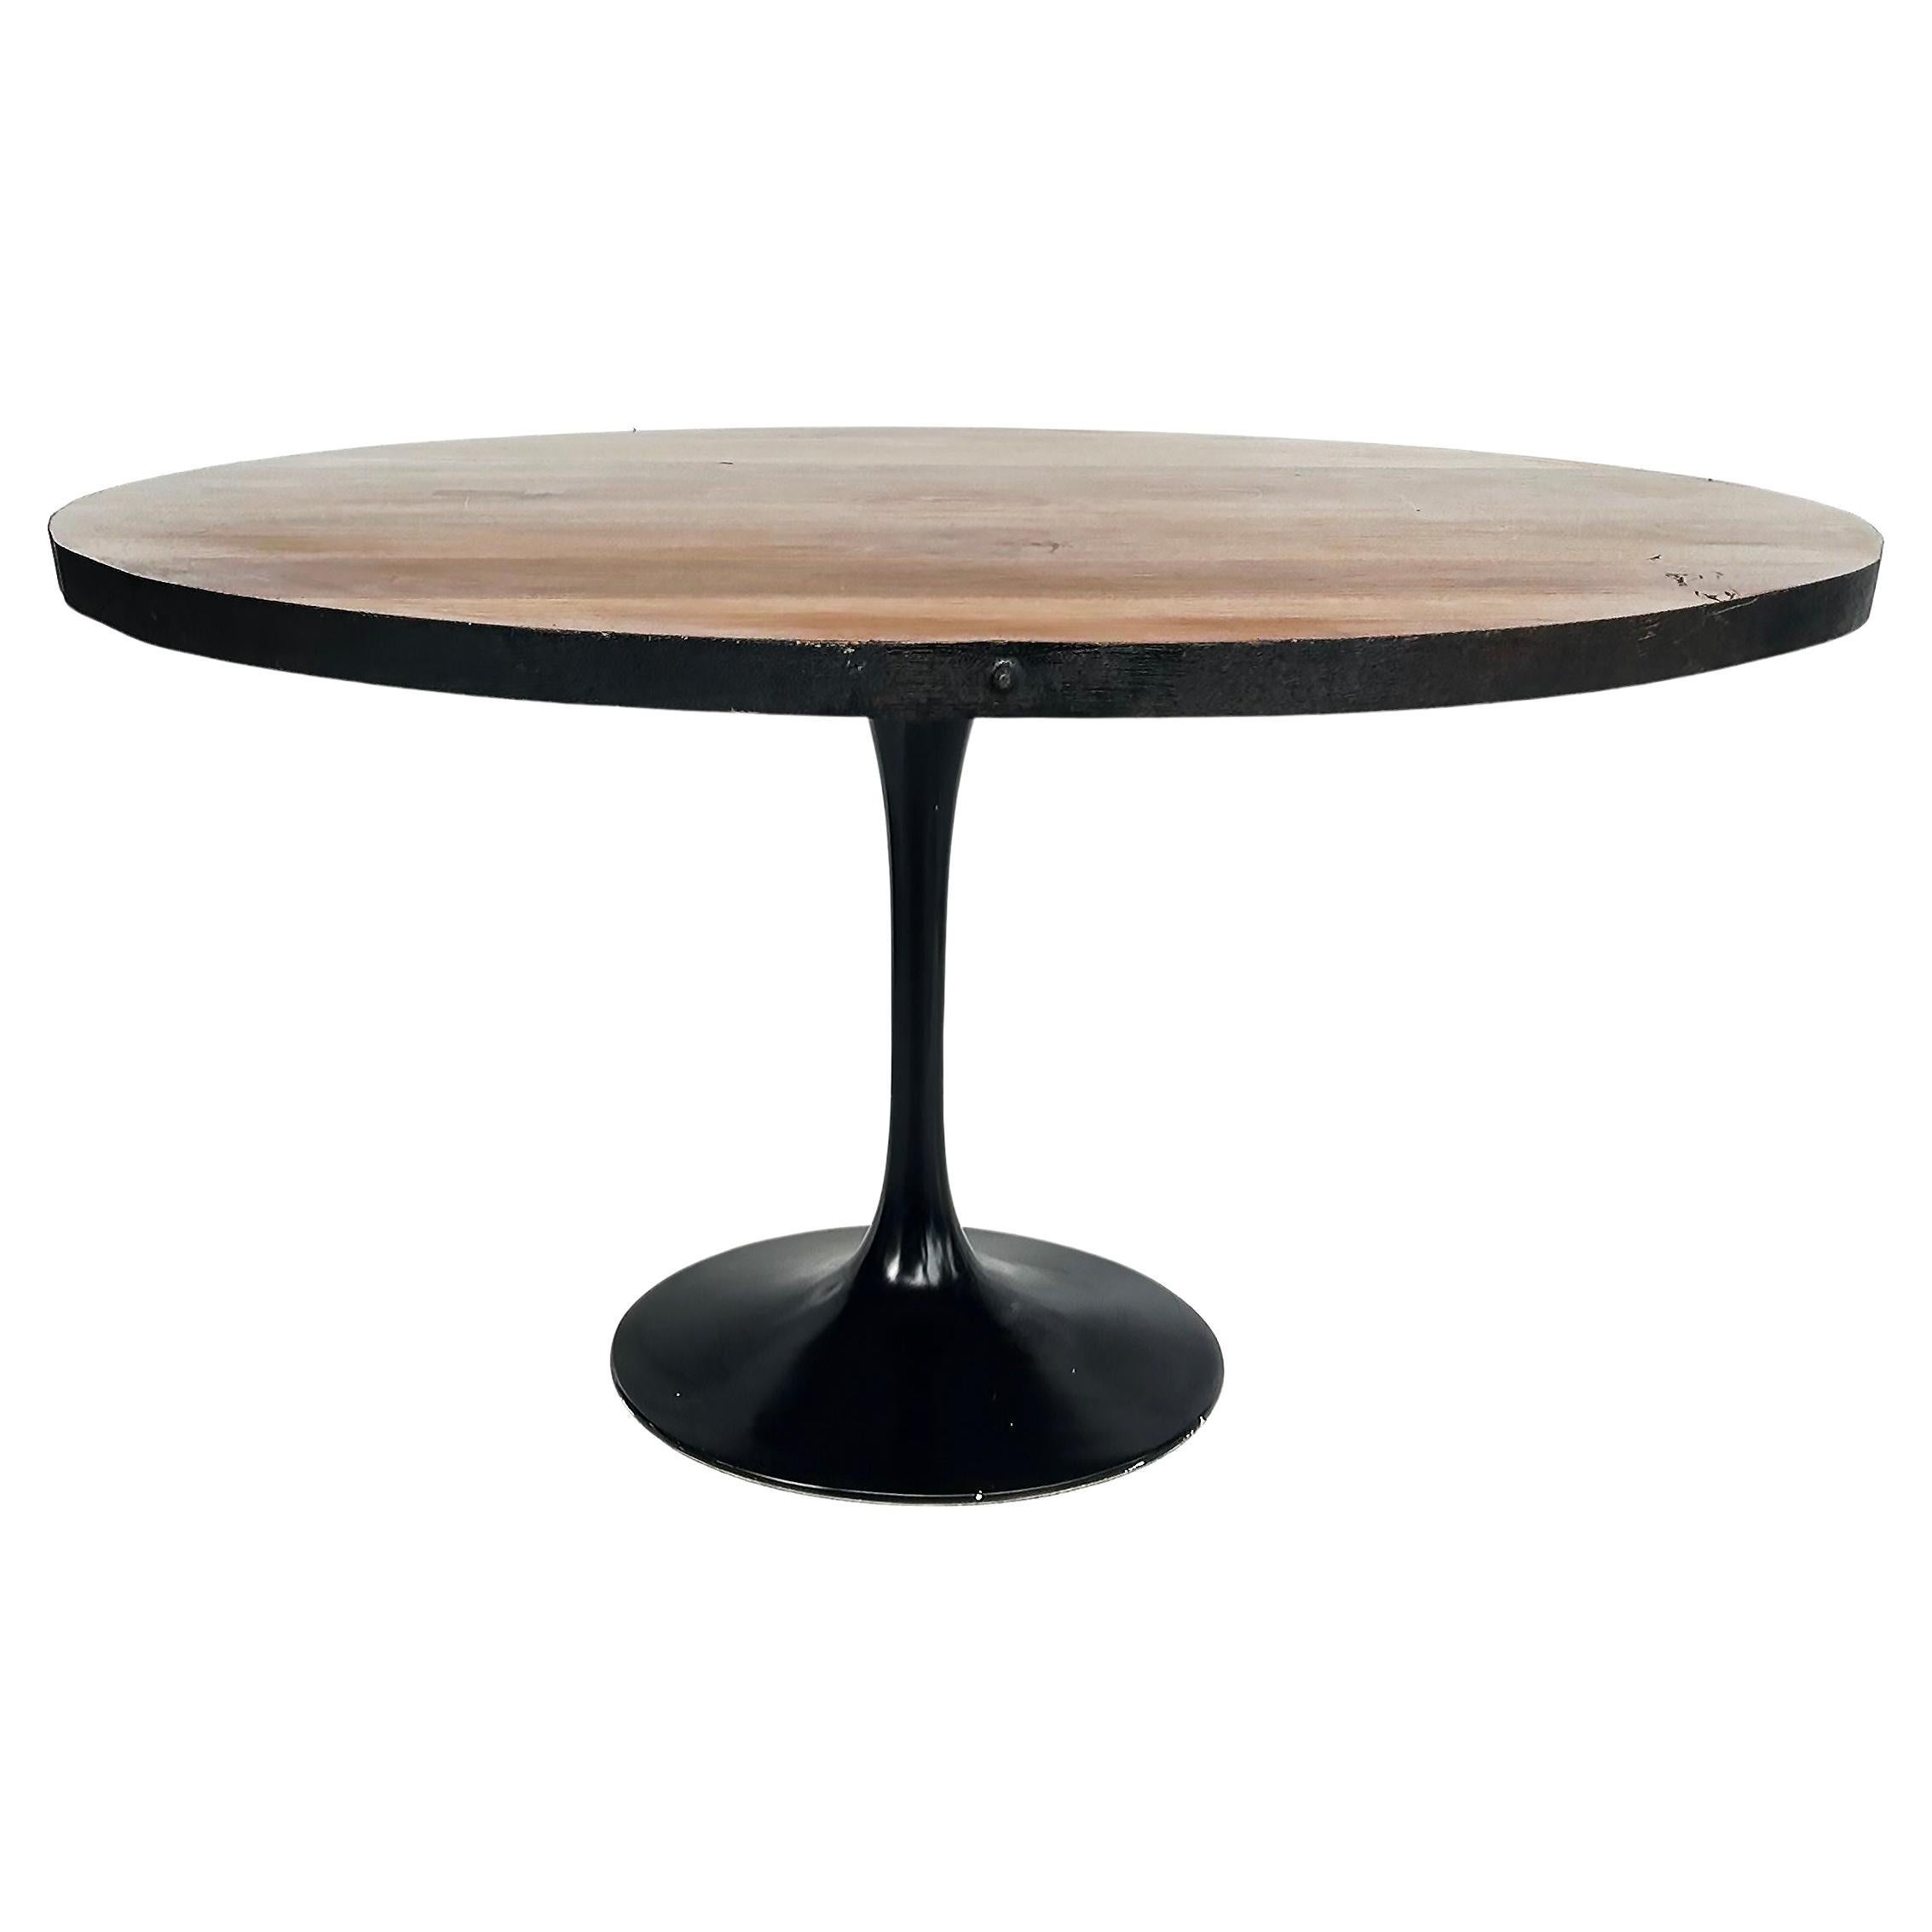 Organic Modern Industrial Tulip Dining Table with Recycled Wood Top